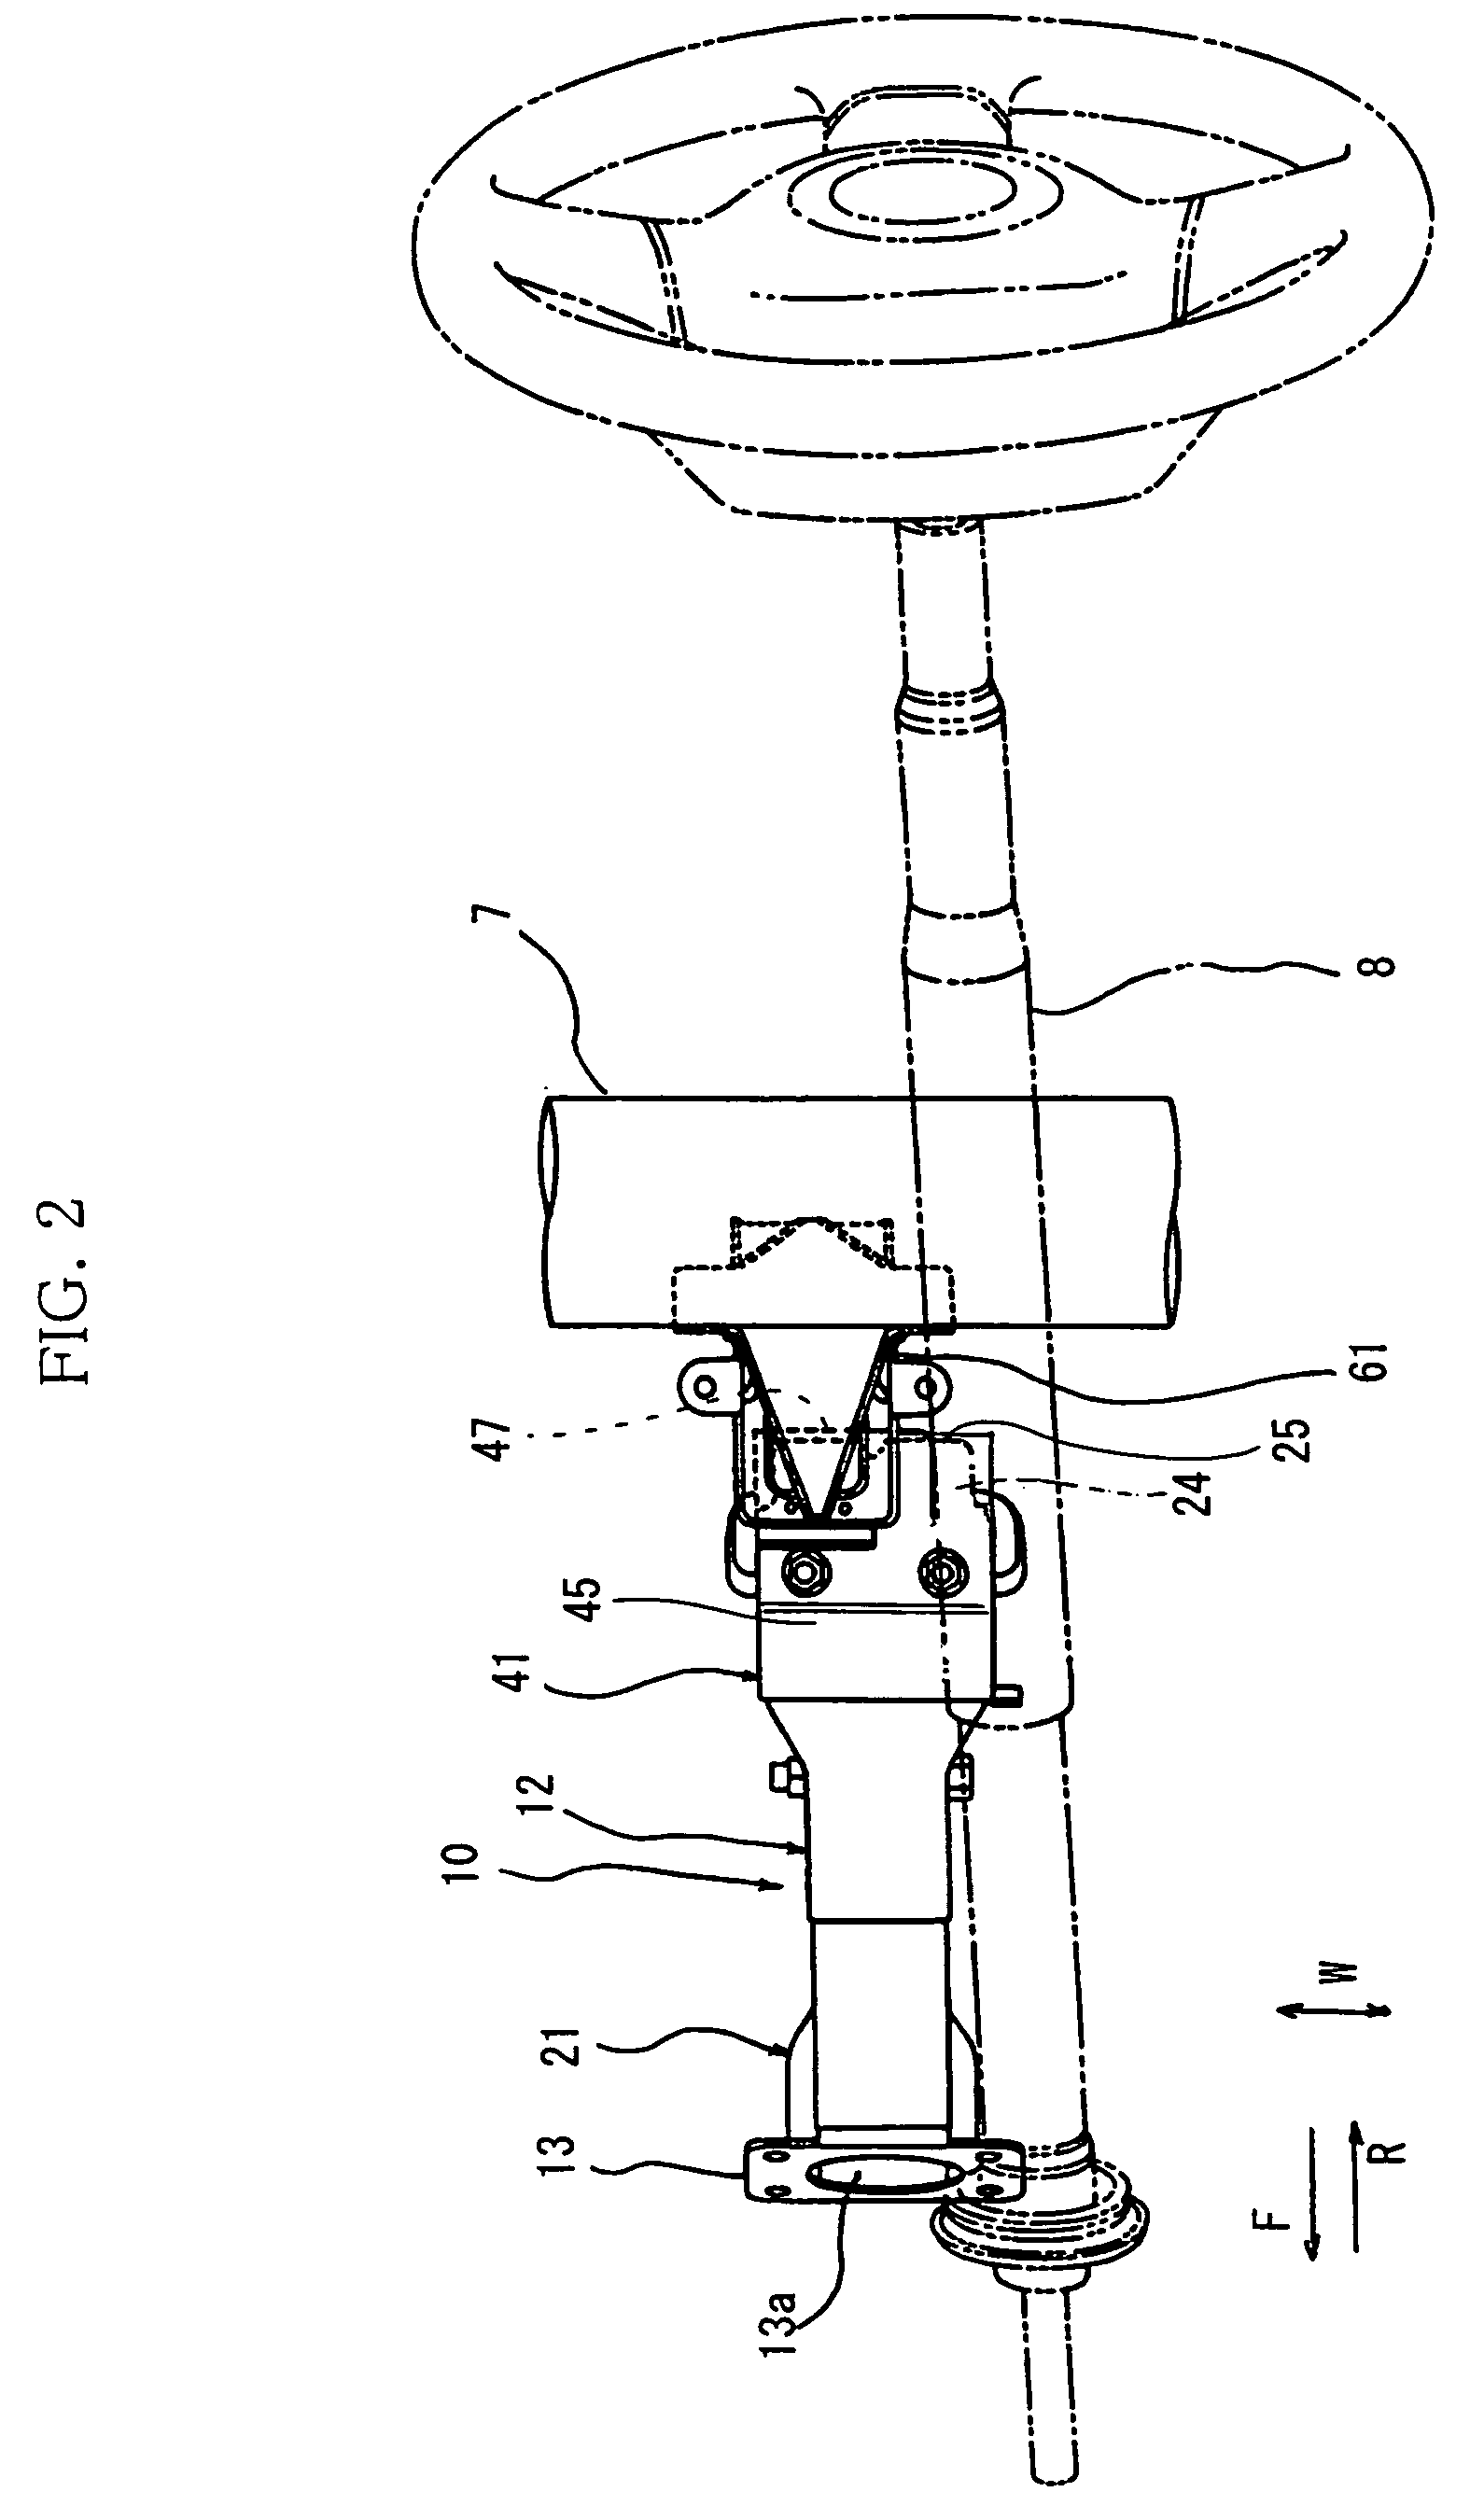 Pedal support structure for vehicle